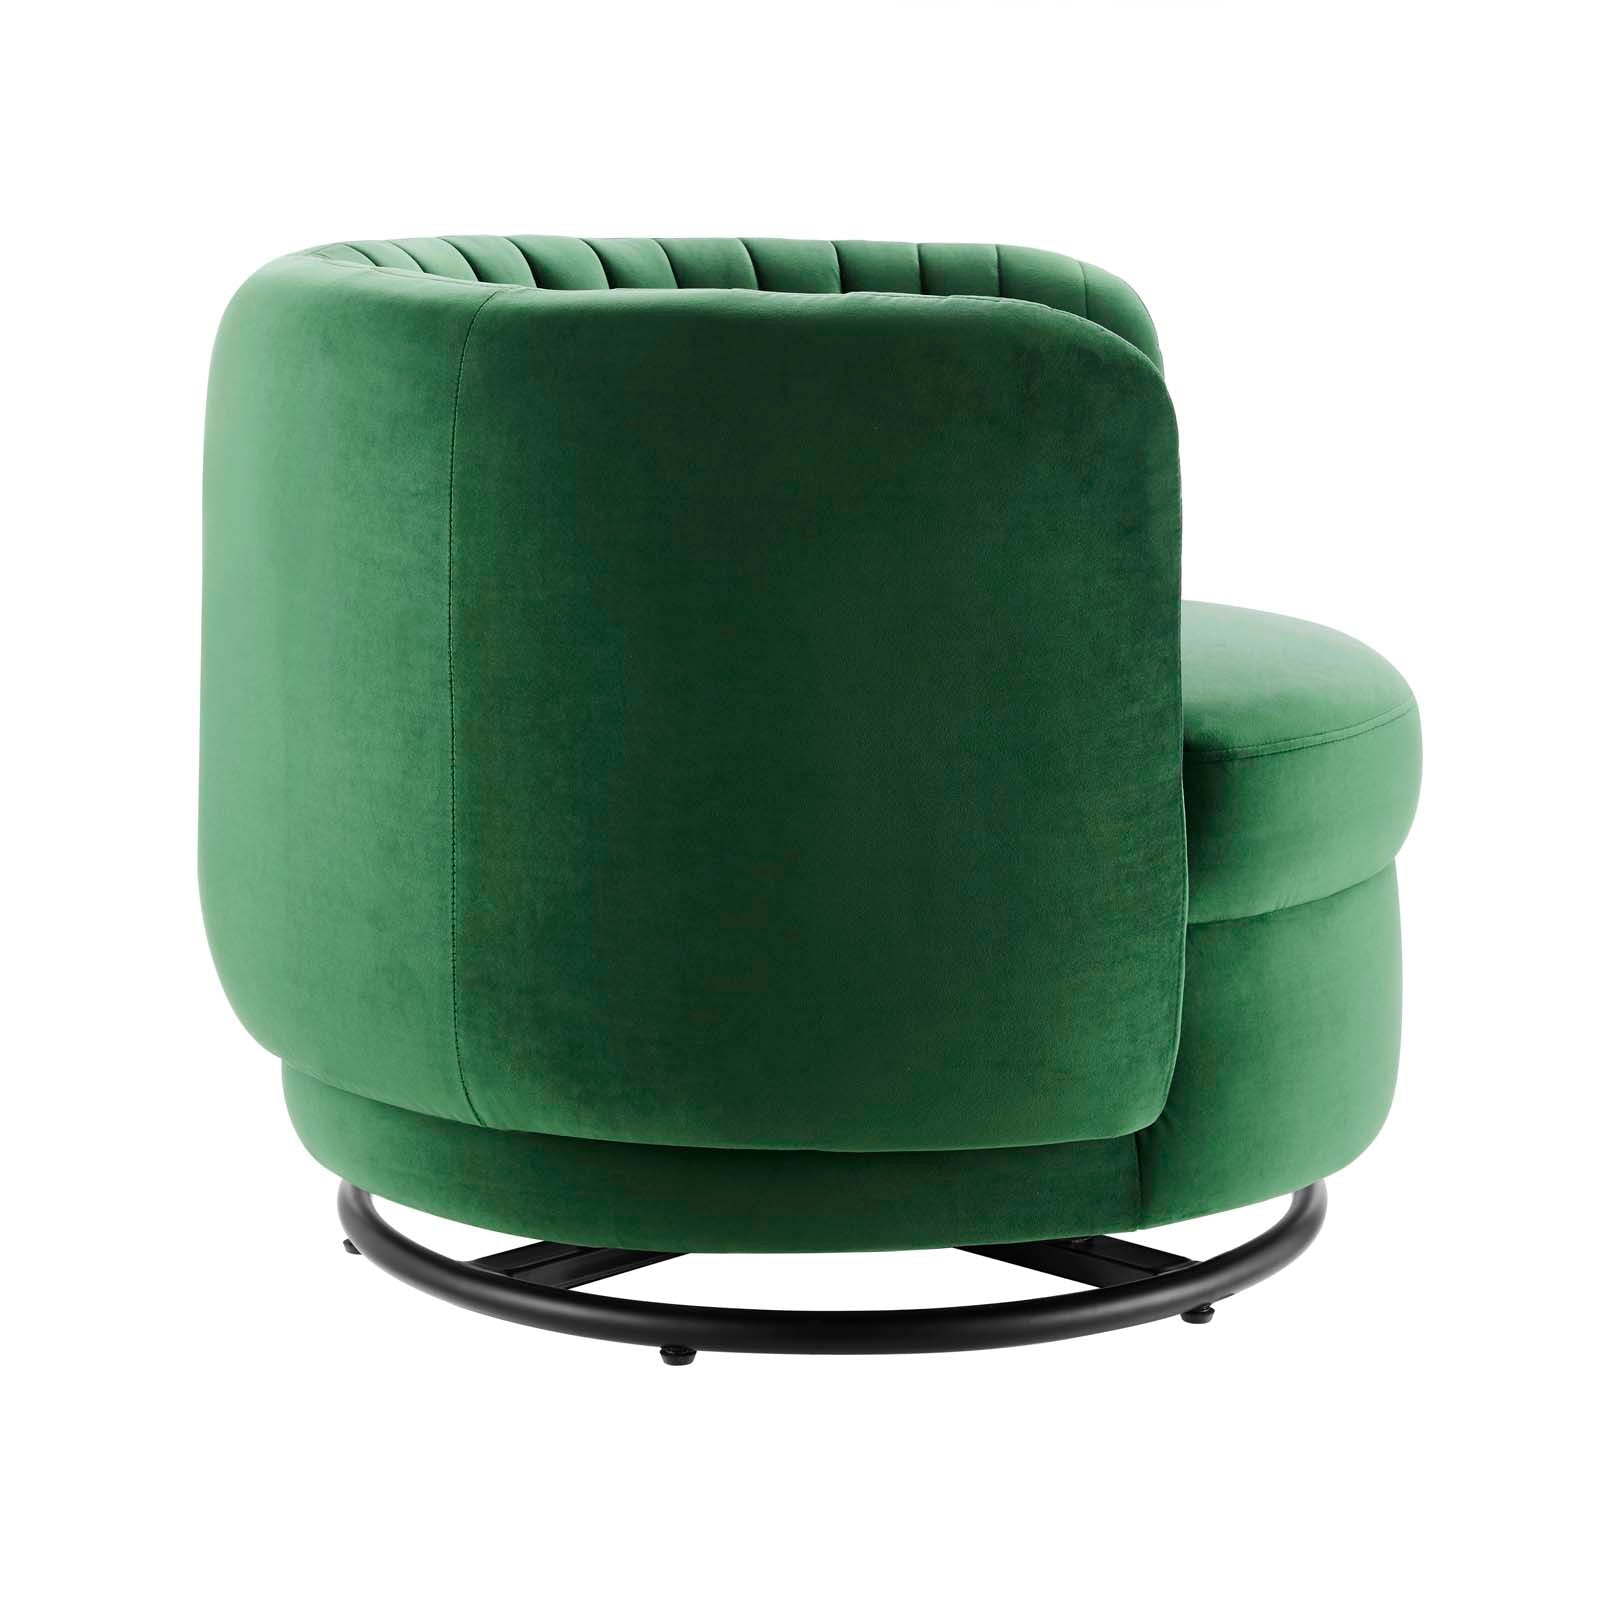 Modway Accent Chairs - Embrace Tufted Performance Velvet Performance Velvet Swivel Chair Black Emerald